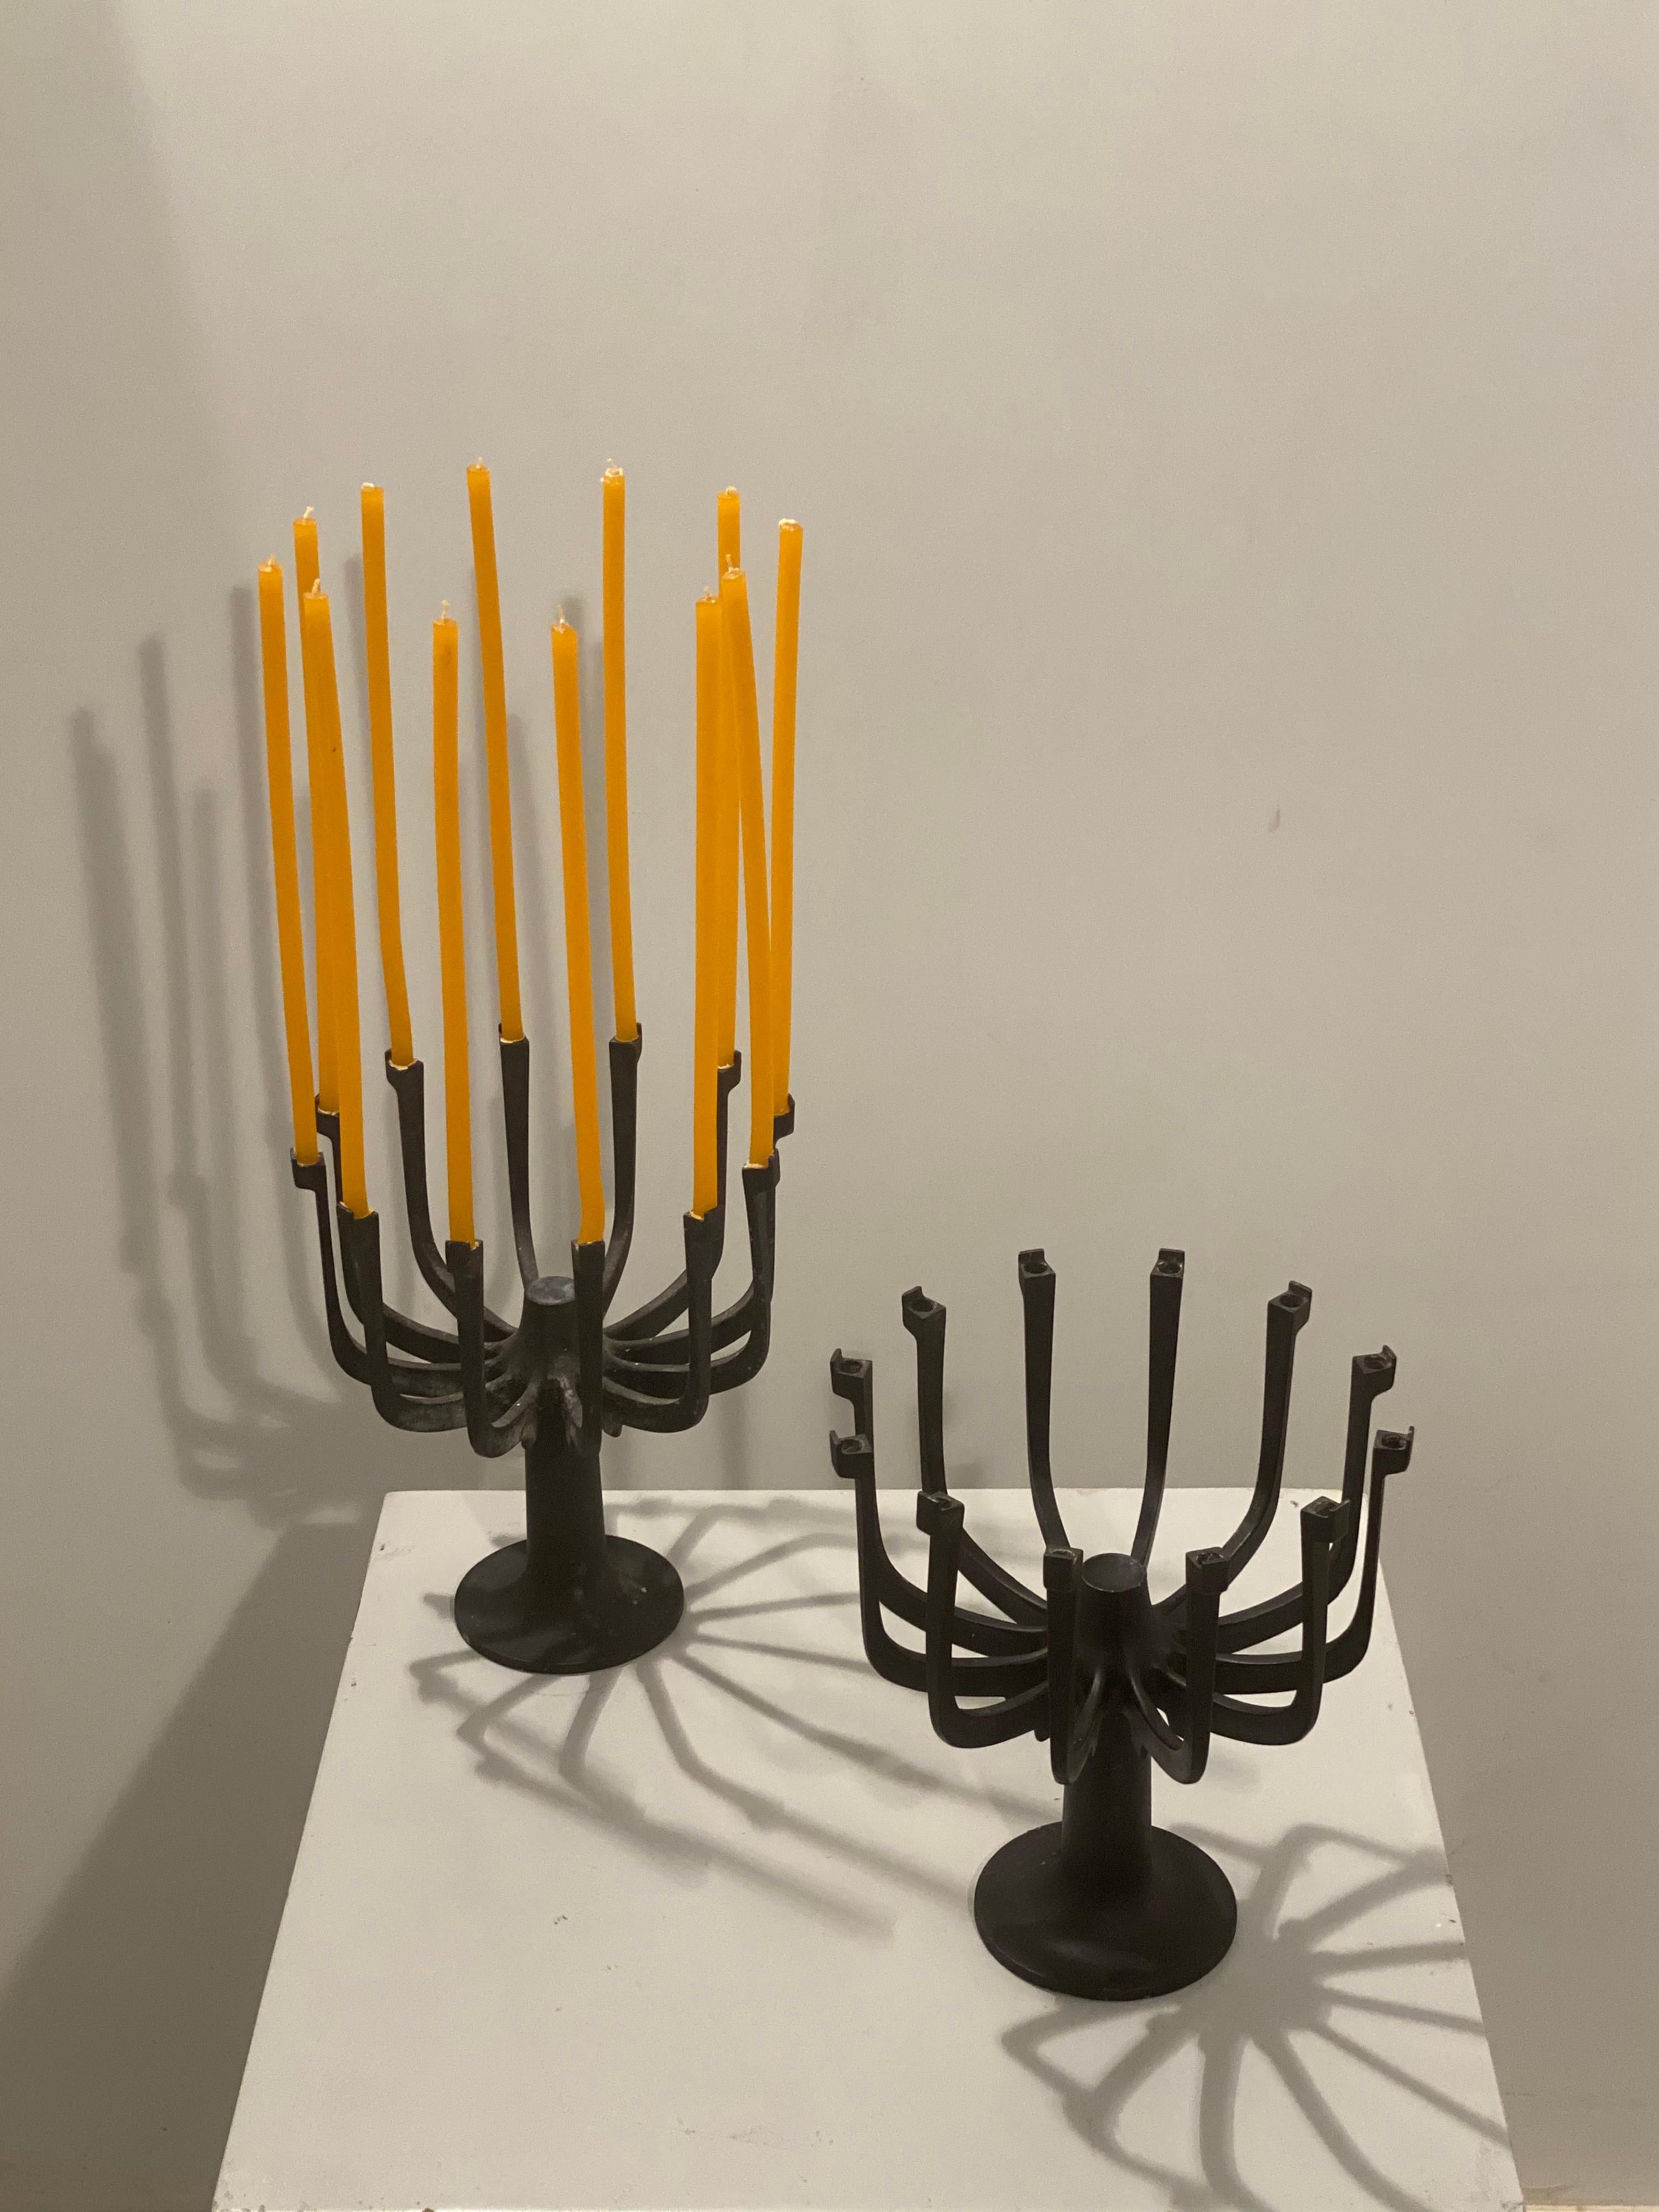 Very elegant pair of Gunnar Cyren for Dansk candle holders made of blackened cast iron. These are very rare pieces, and even more so are the larger 12-candle models. They come with these beautiful slim Romanian hand-crafted candles. Tag engraved